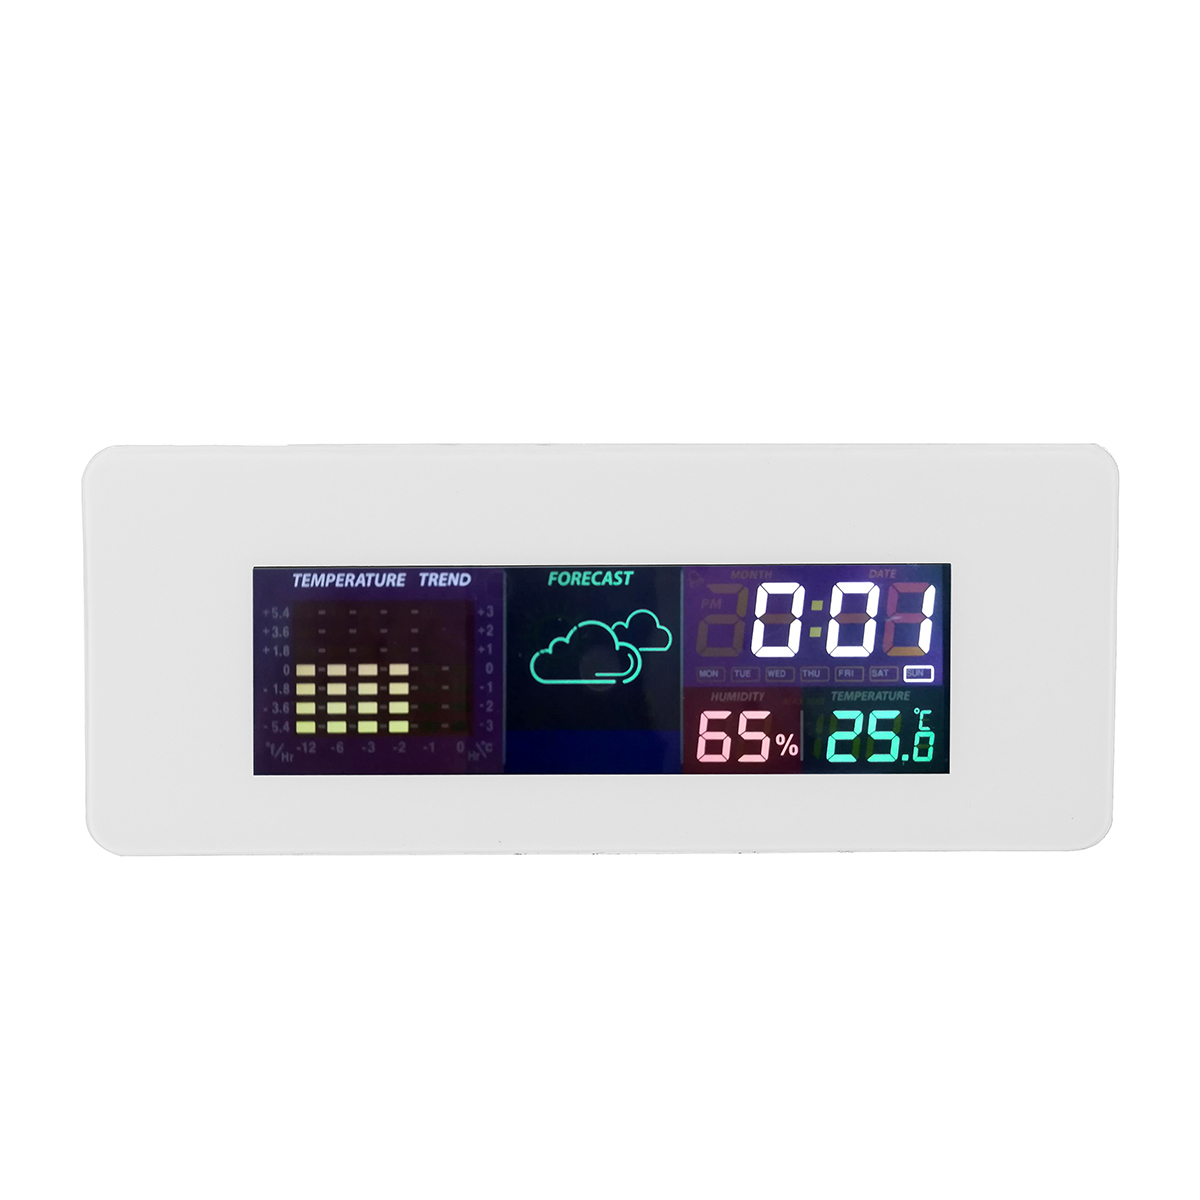 

Multi-function Color Screen Temperature Humidity Meter Hygrometer Monitor Clock with Calendar Alarm Clock 12/24 Hour System TS S65